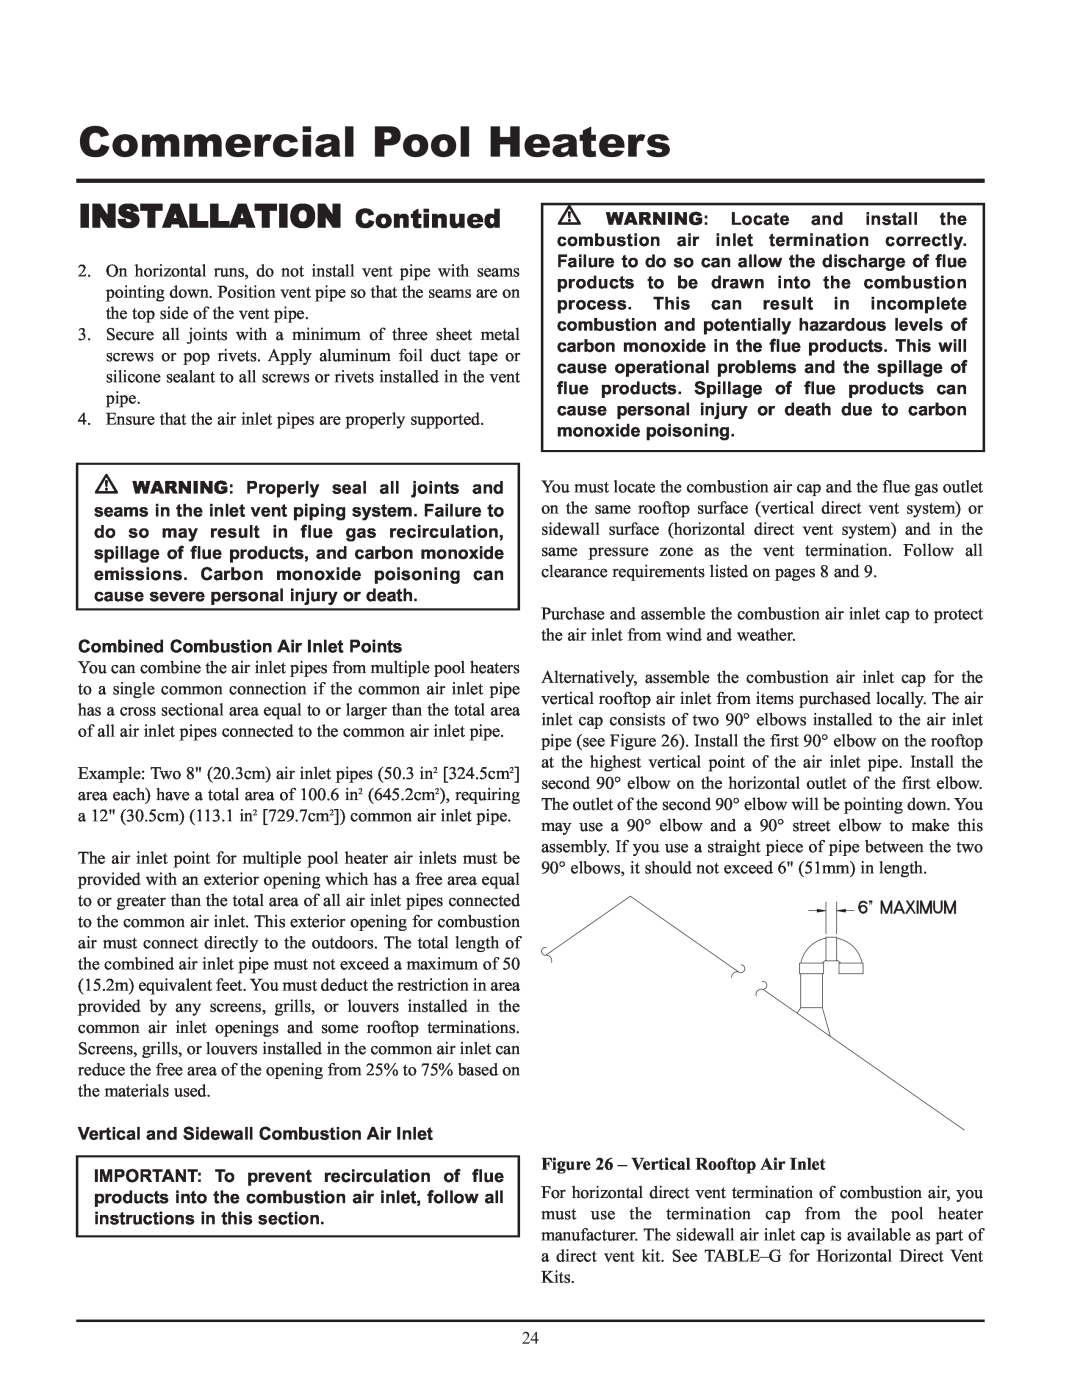 Lochinvar GAS HEATER FOR COMMERICAL POOL APPLICATIONS service manual Commercial Pool Heaters, INSTALLATION Continued 